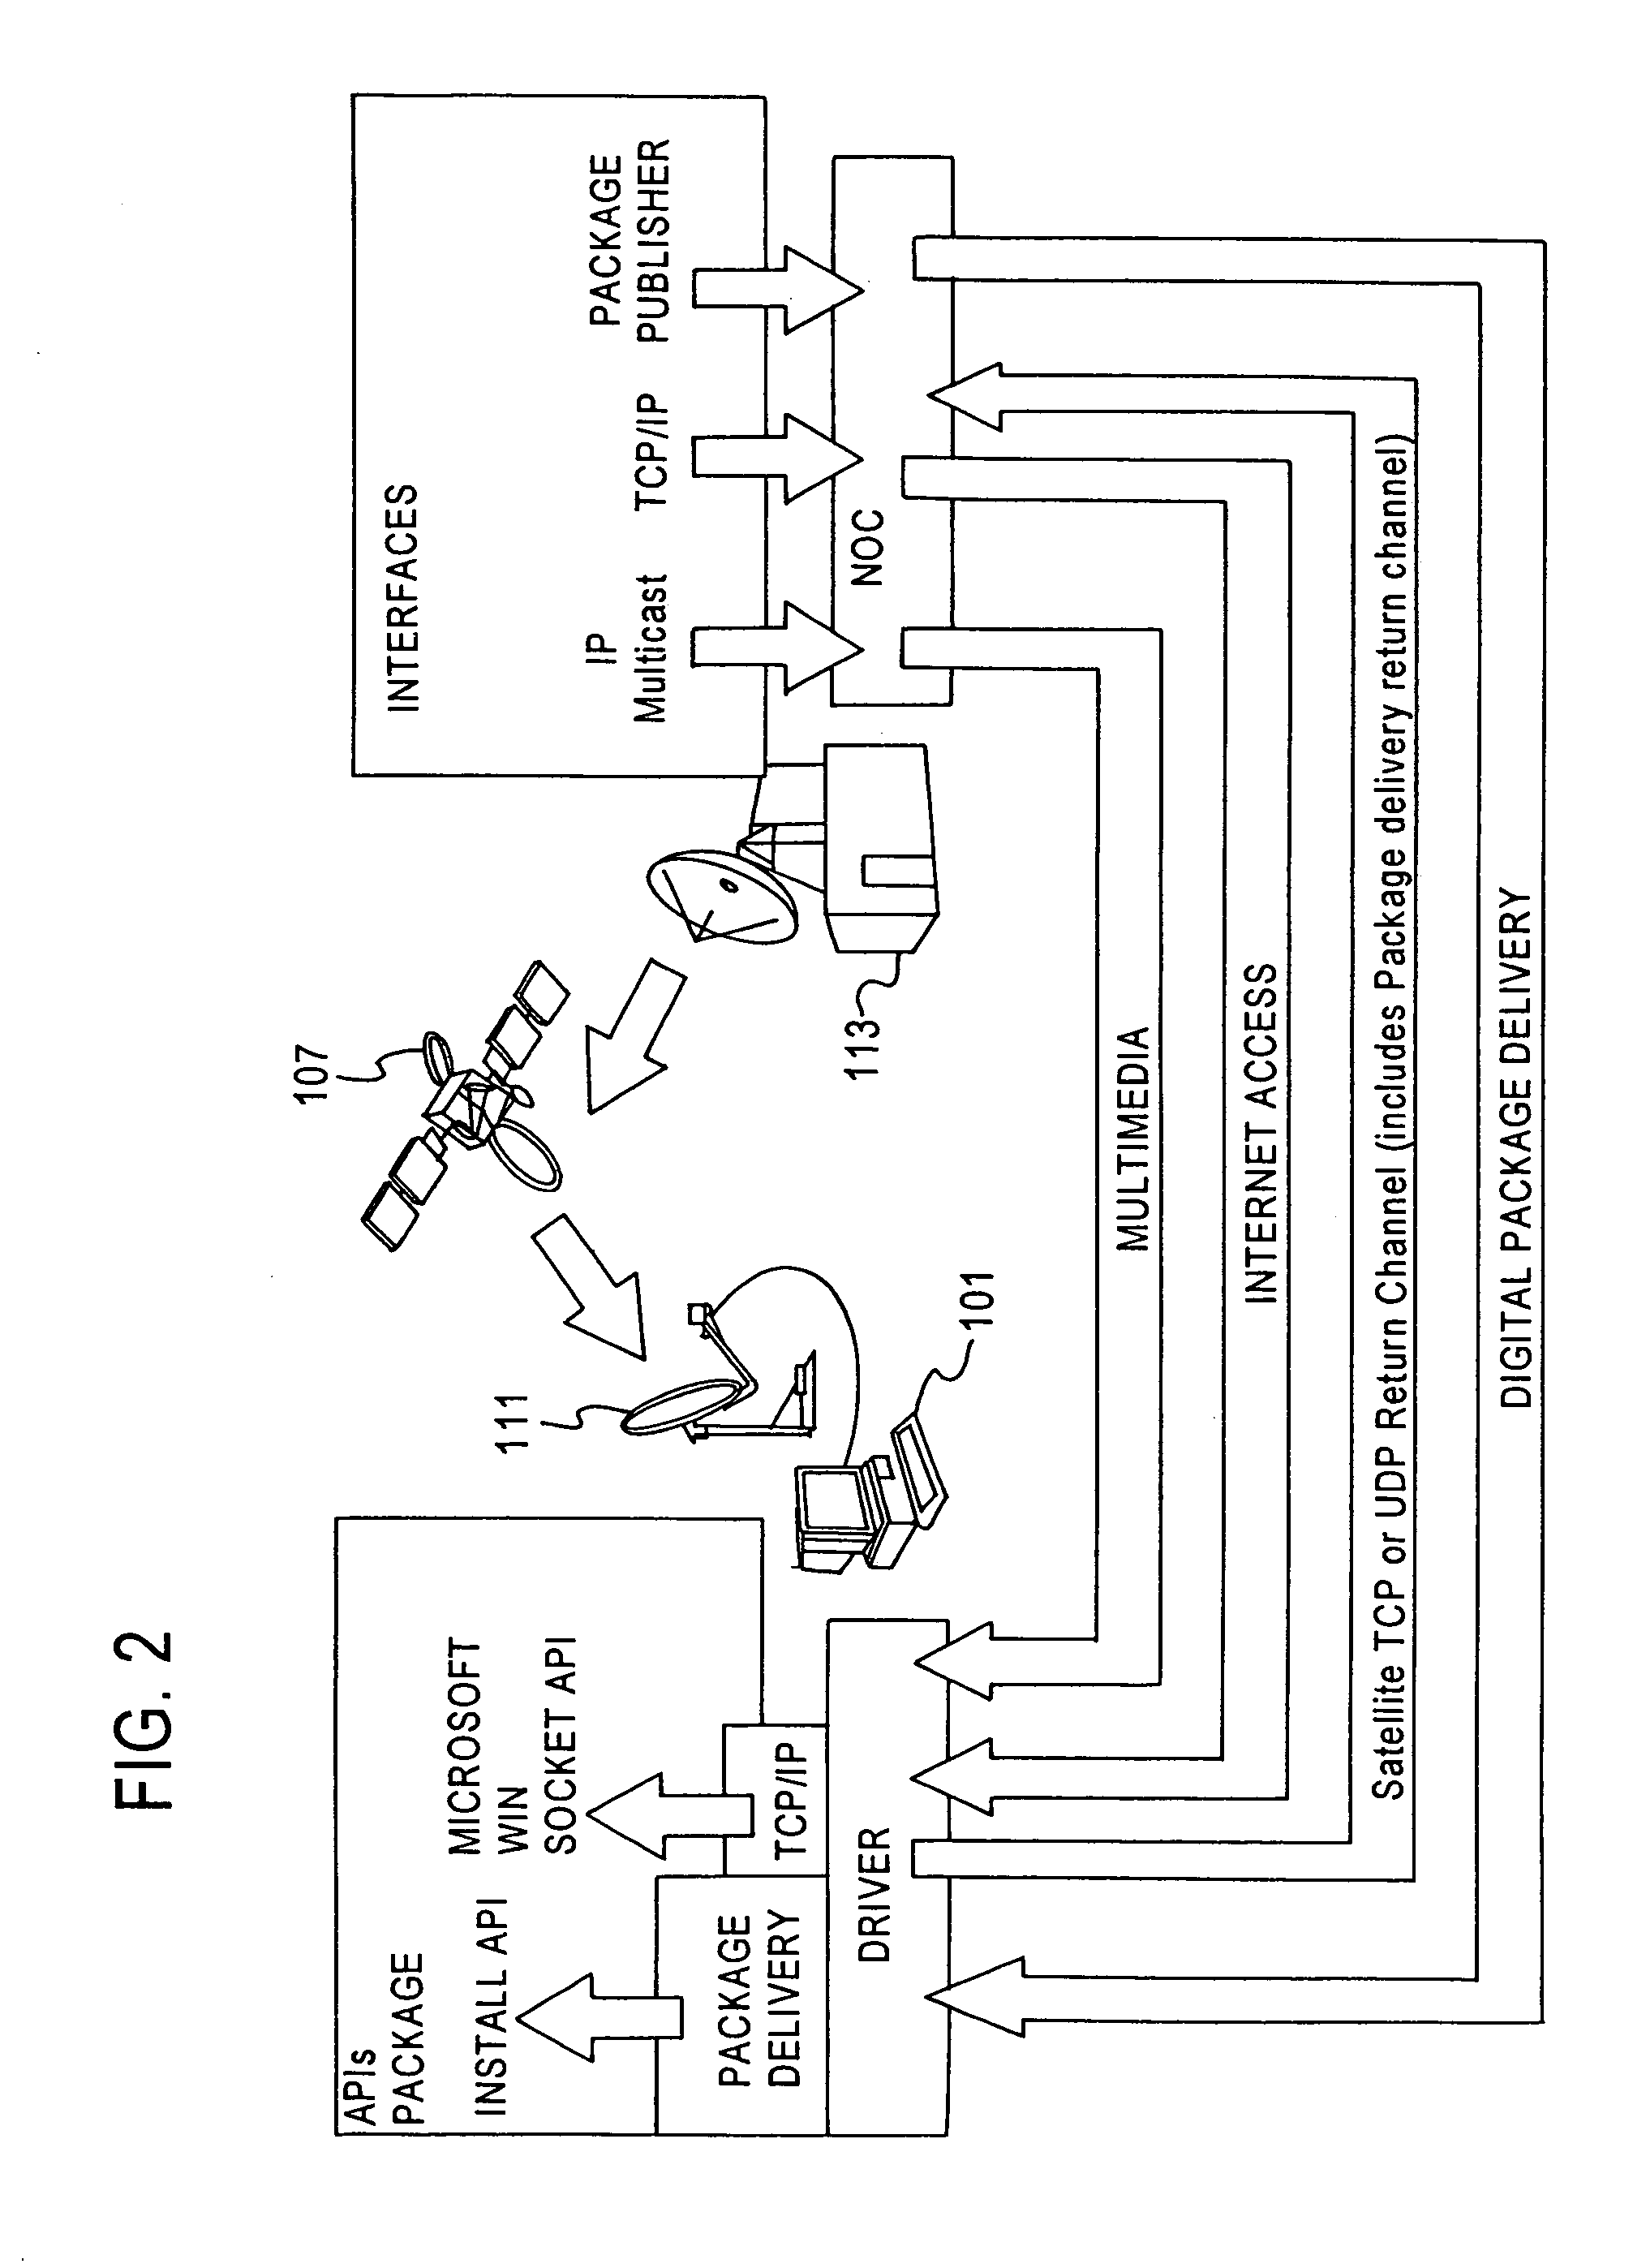 System and method for providing a two-way satellite system